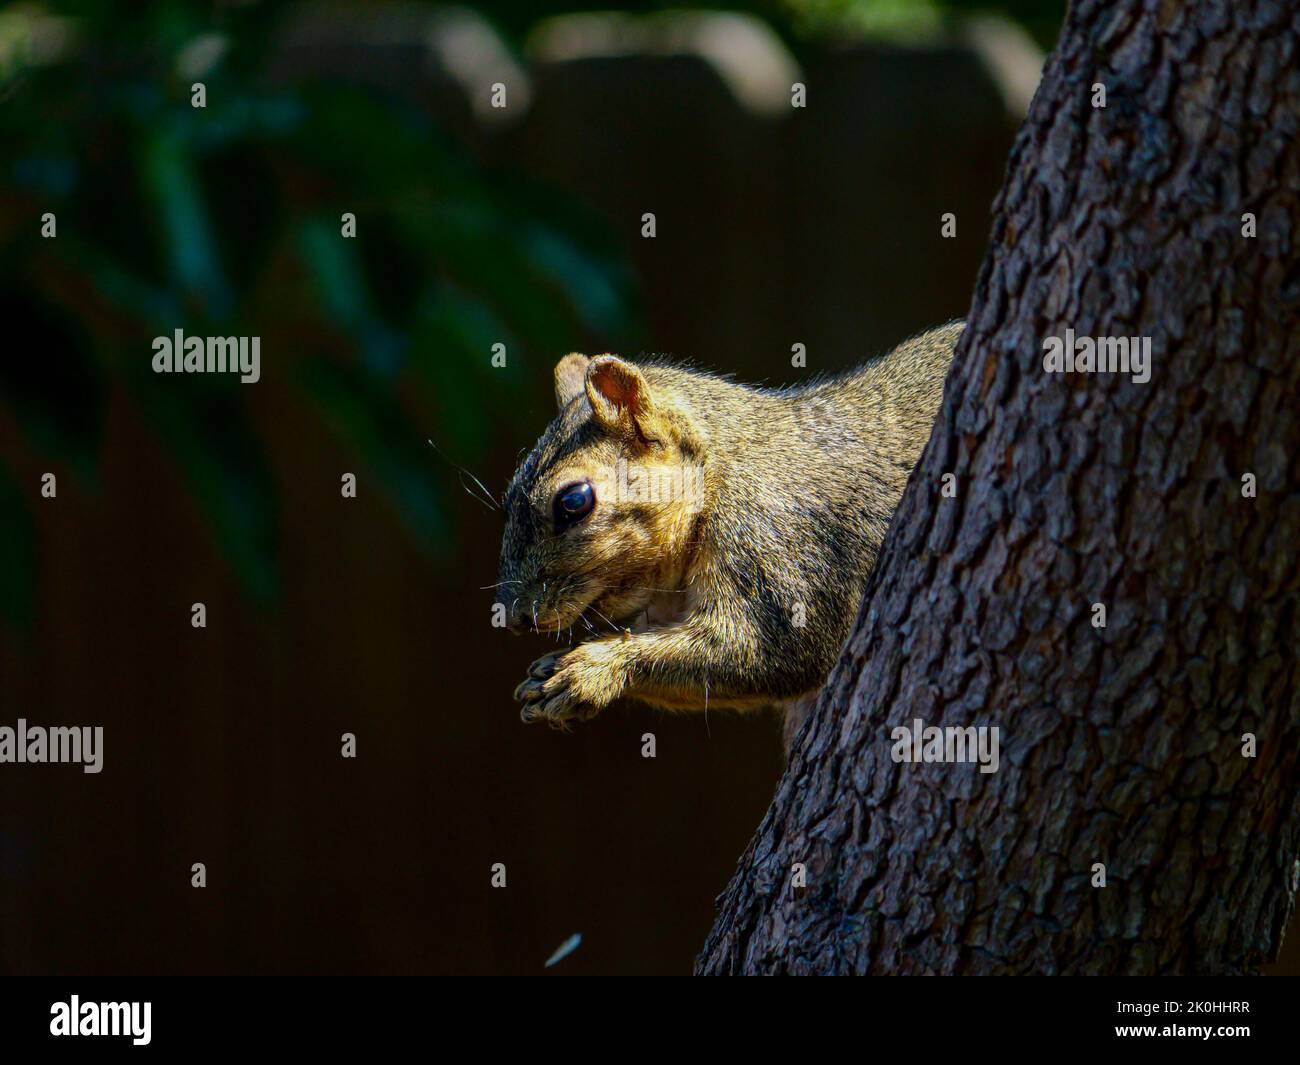 A squirrel inclined on a tree with leaves in the bokeh background Stock Photo